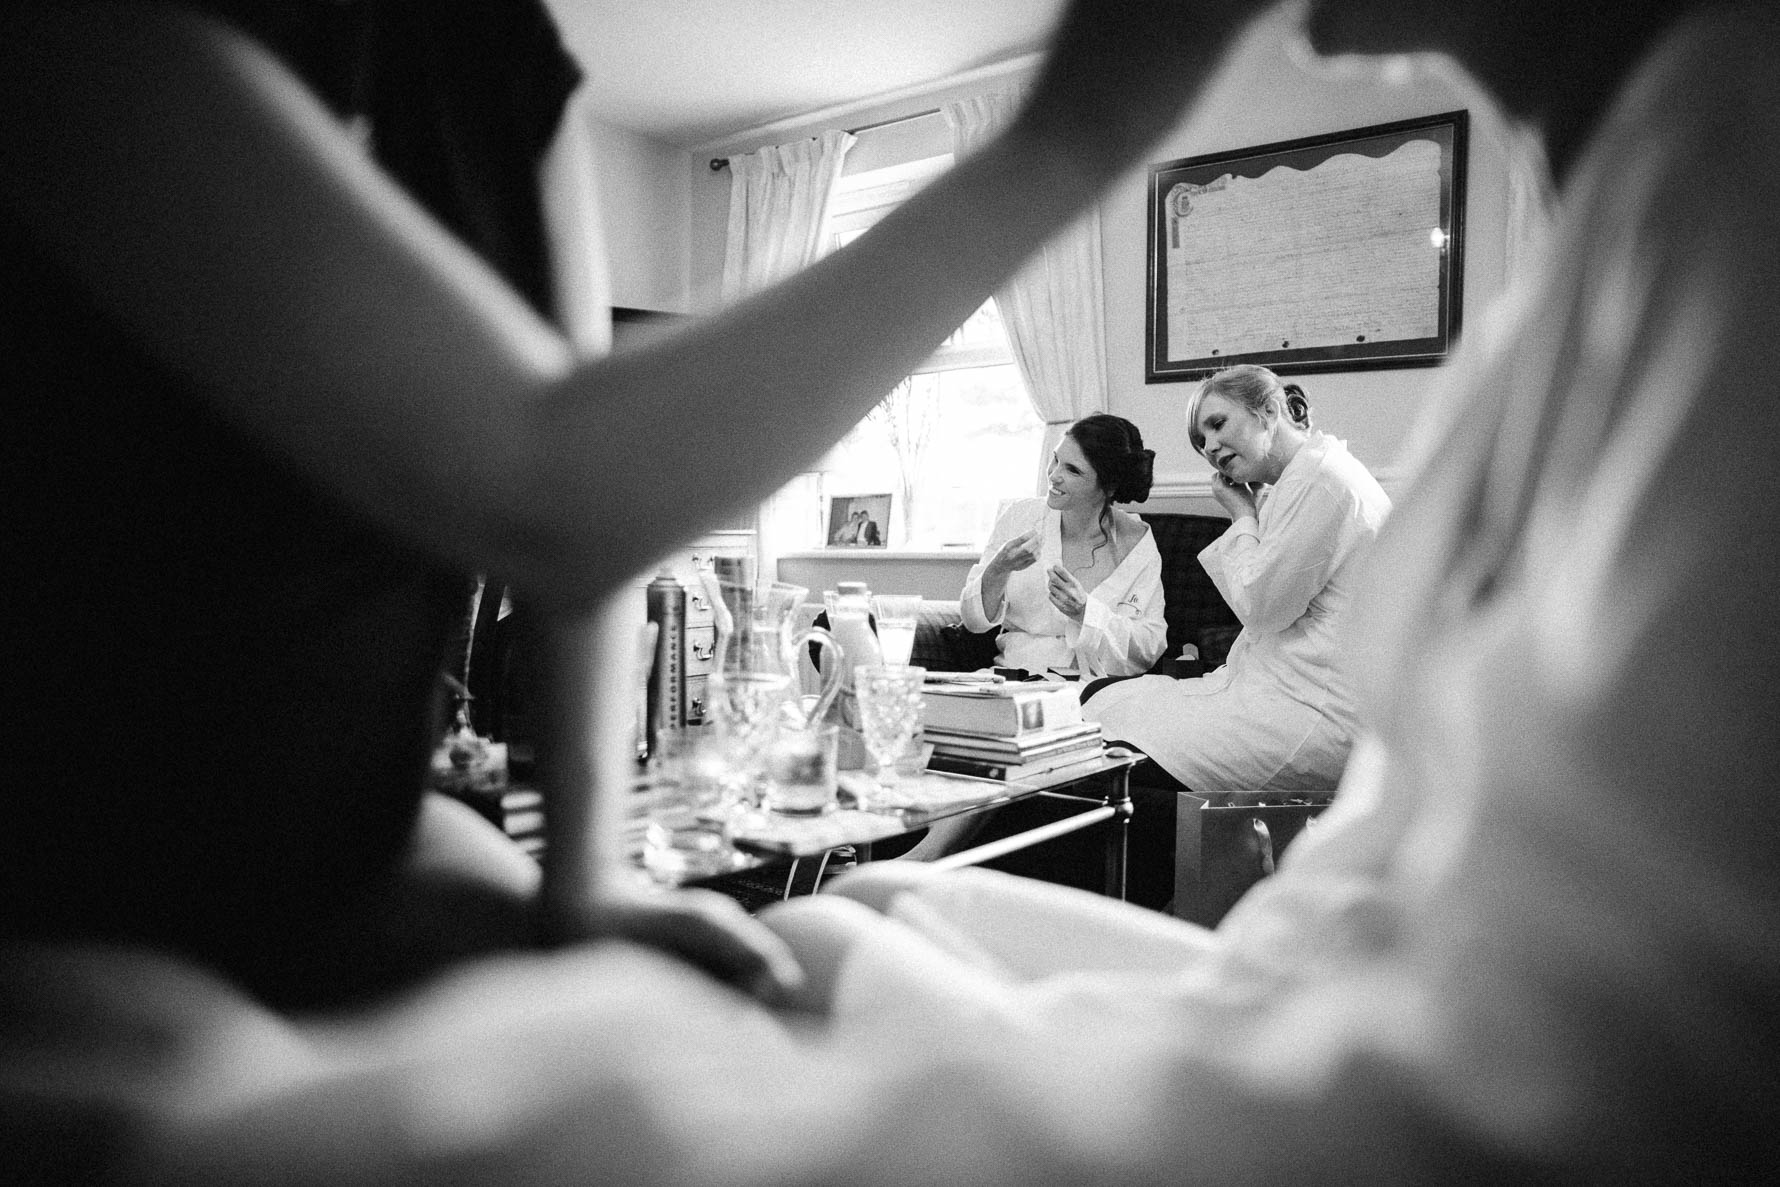 Black and white photo of bridesmaids wearing dressing gowns getting ready in the background while the bride is having her makeup done in the foreground